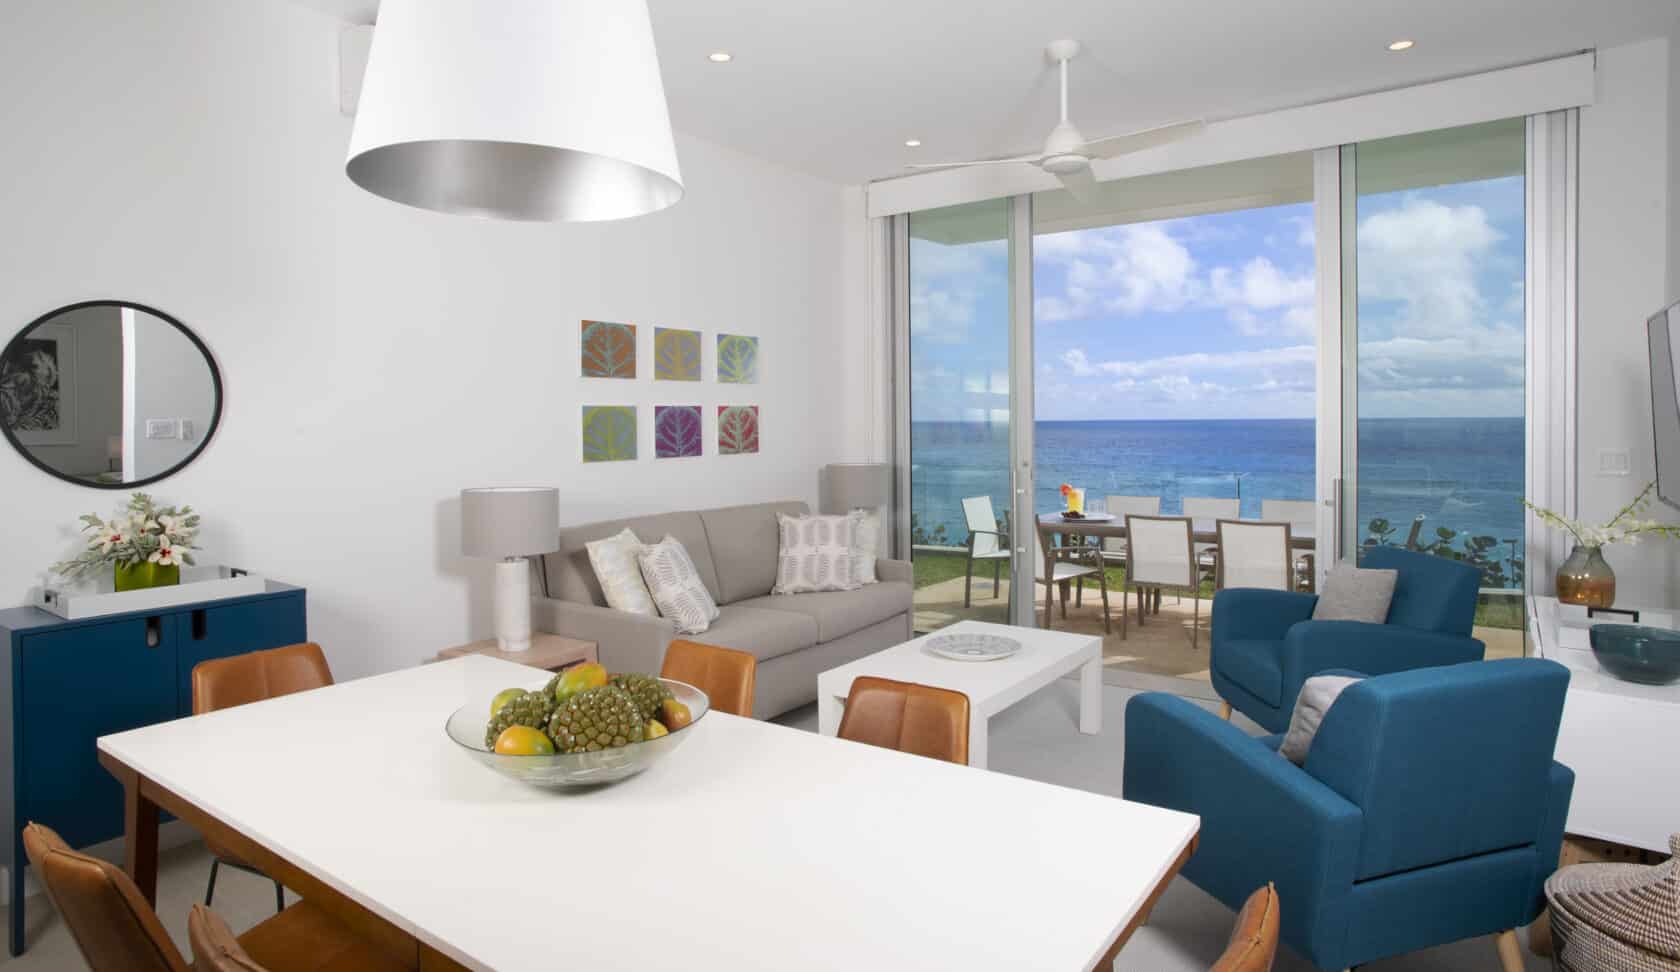 A living room with a view of the ocean, perfect for a Bermuda vacation rental or residence.